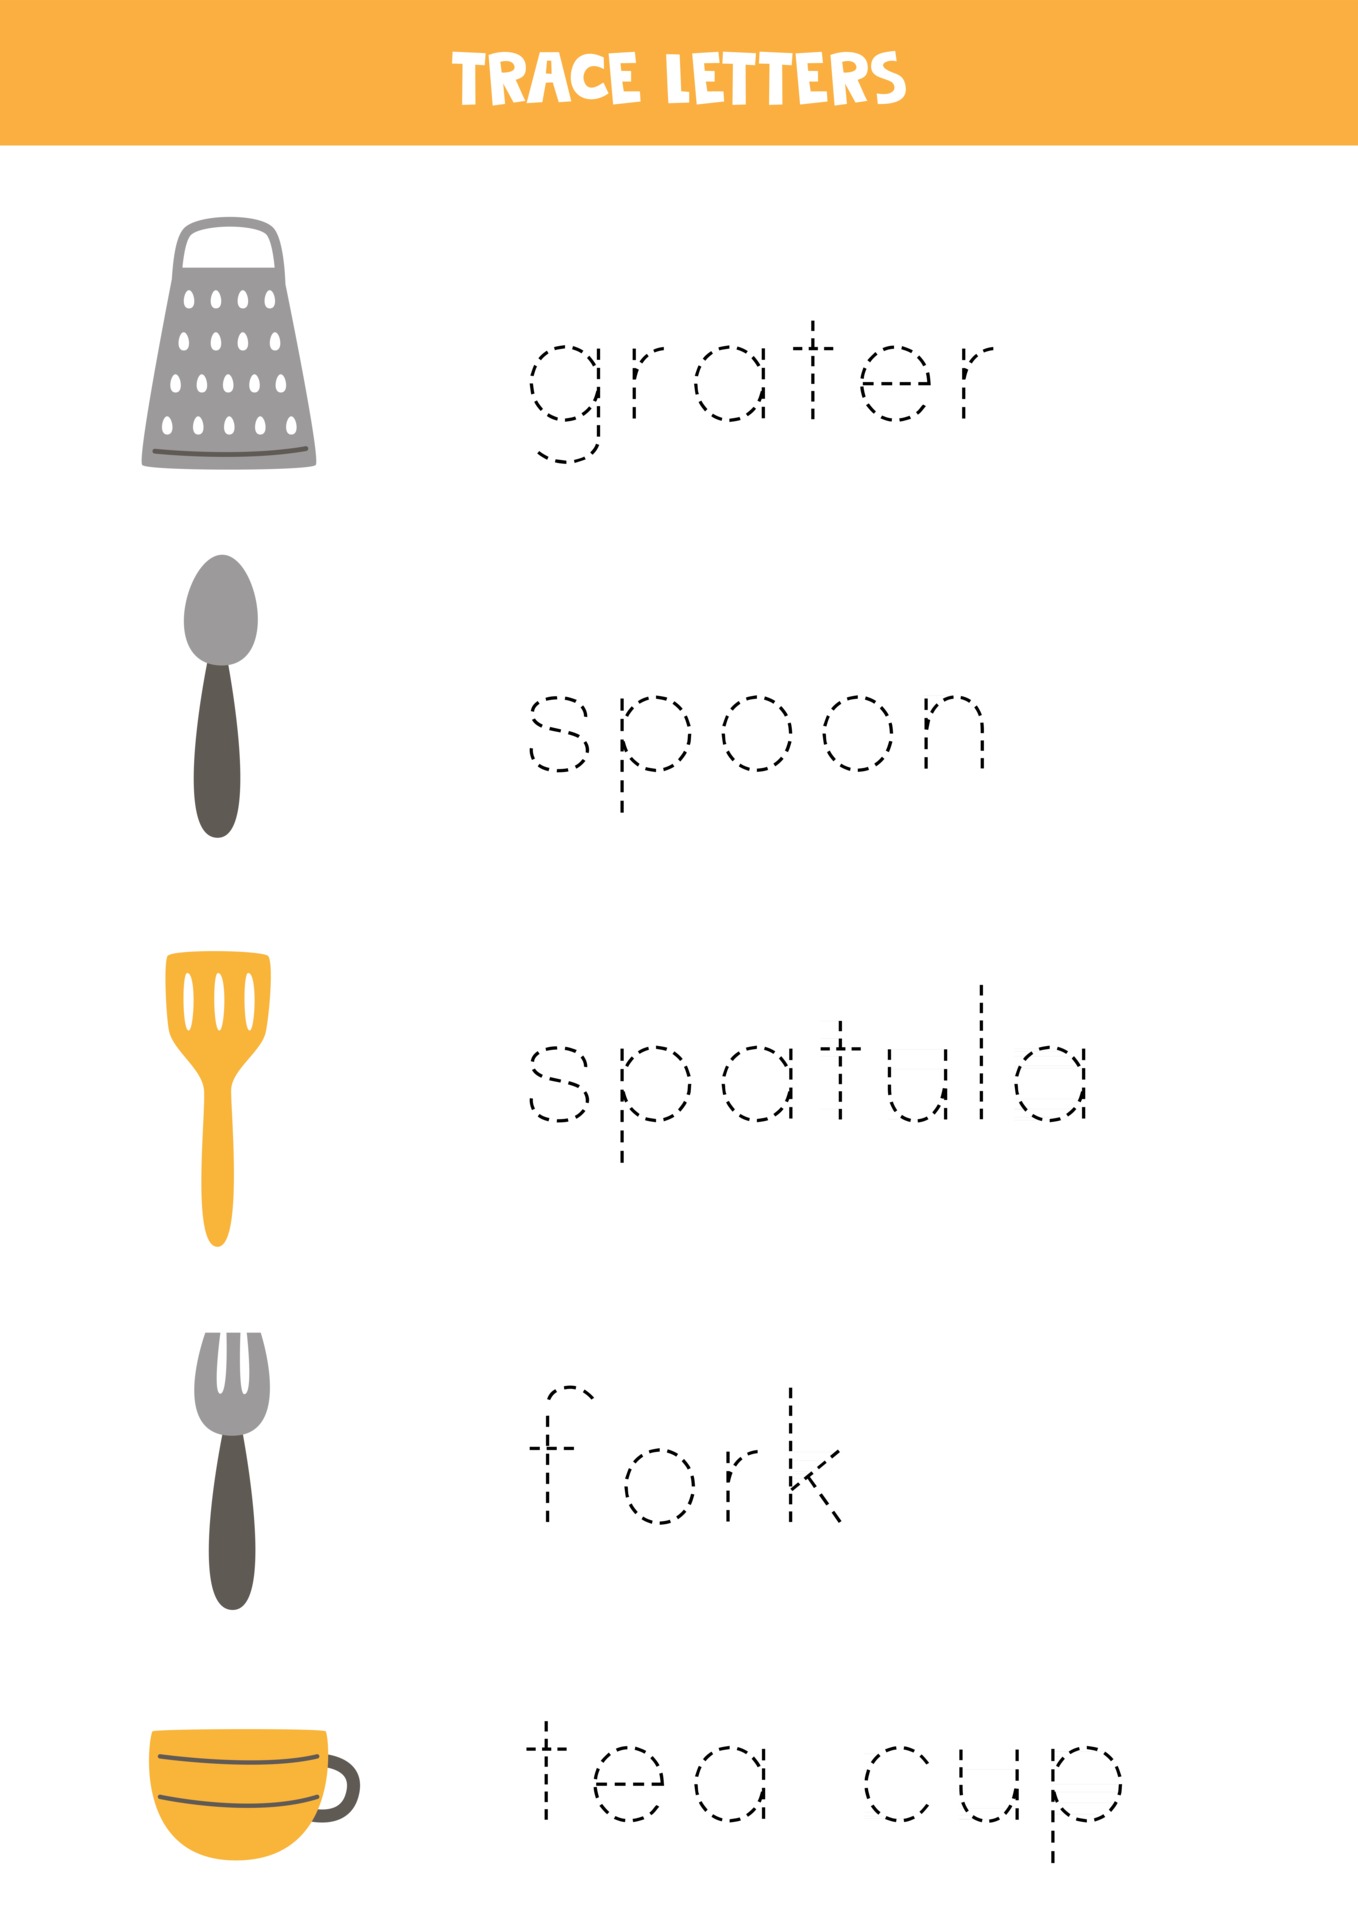 https://static.vecteezy.com/system/resources/previews/002/529/431/original/tracing-letters-with-kitchen-utensils-writing-practice-vector.jpg